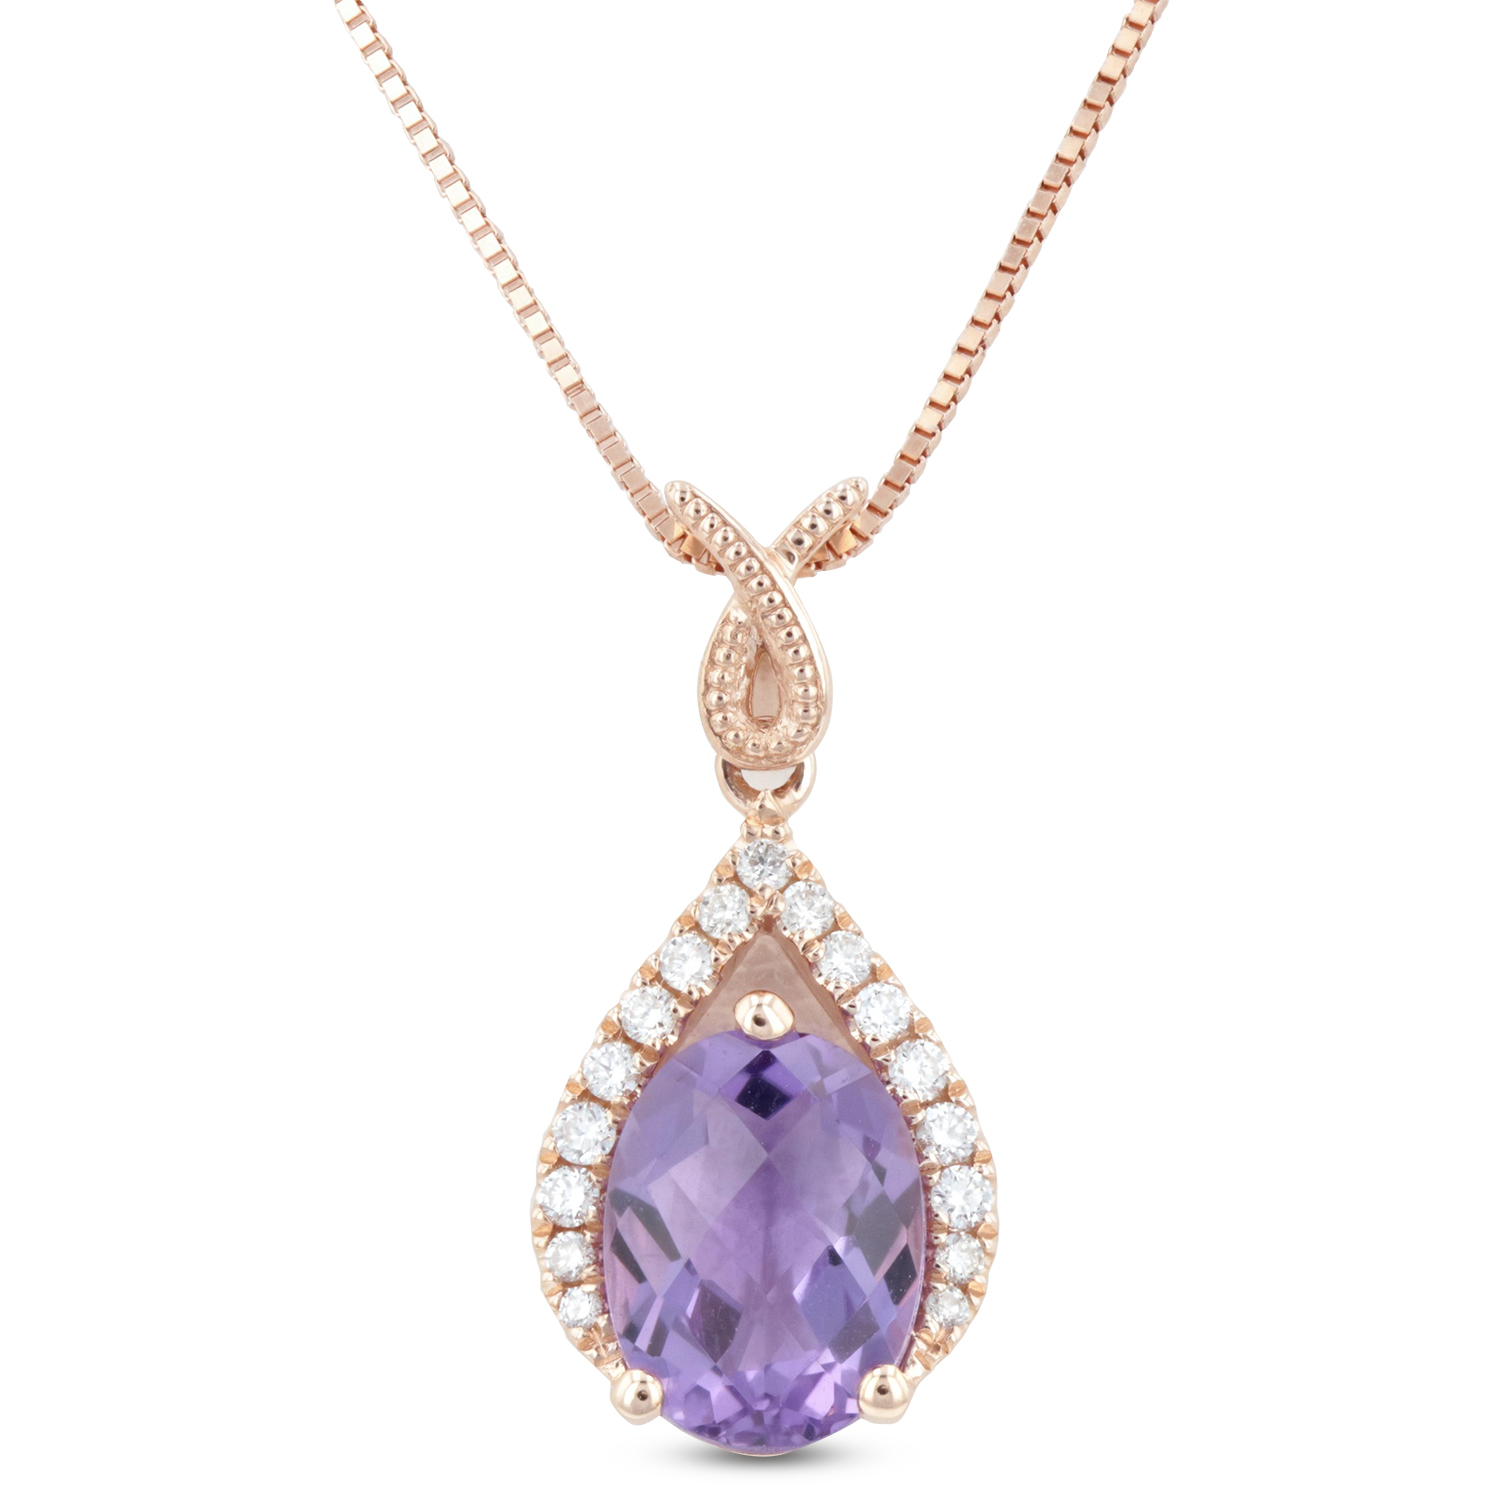 View 1.21ctw Diamond and Amethyst Pendant in 14k Rose Gold